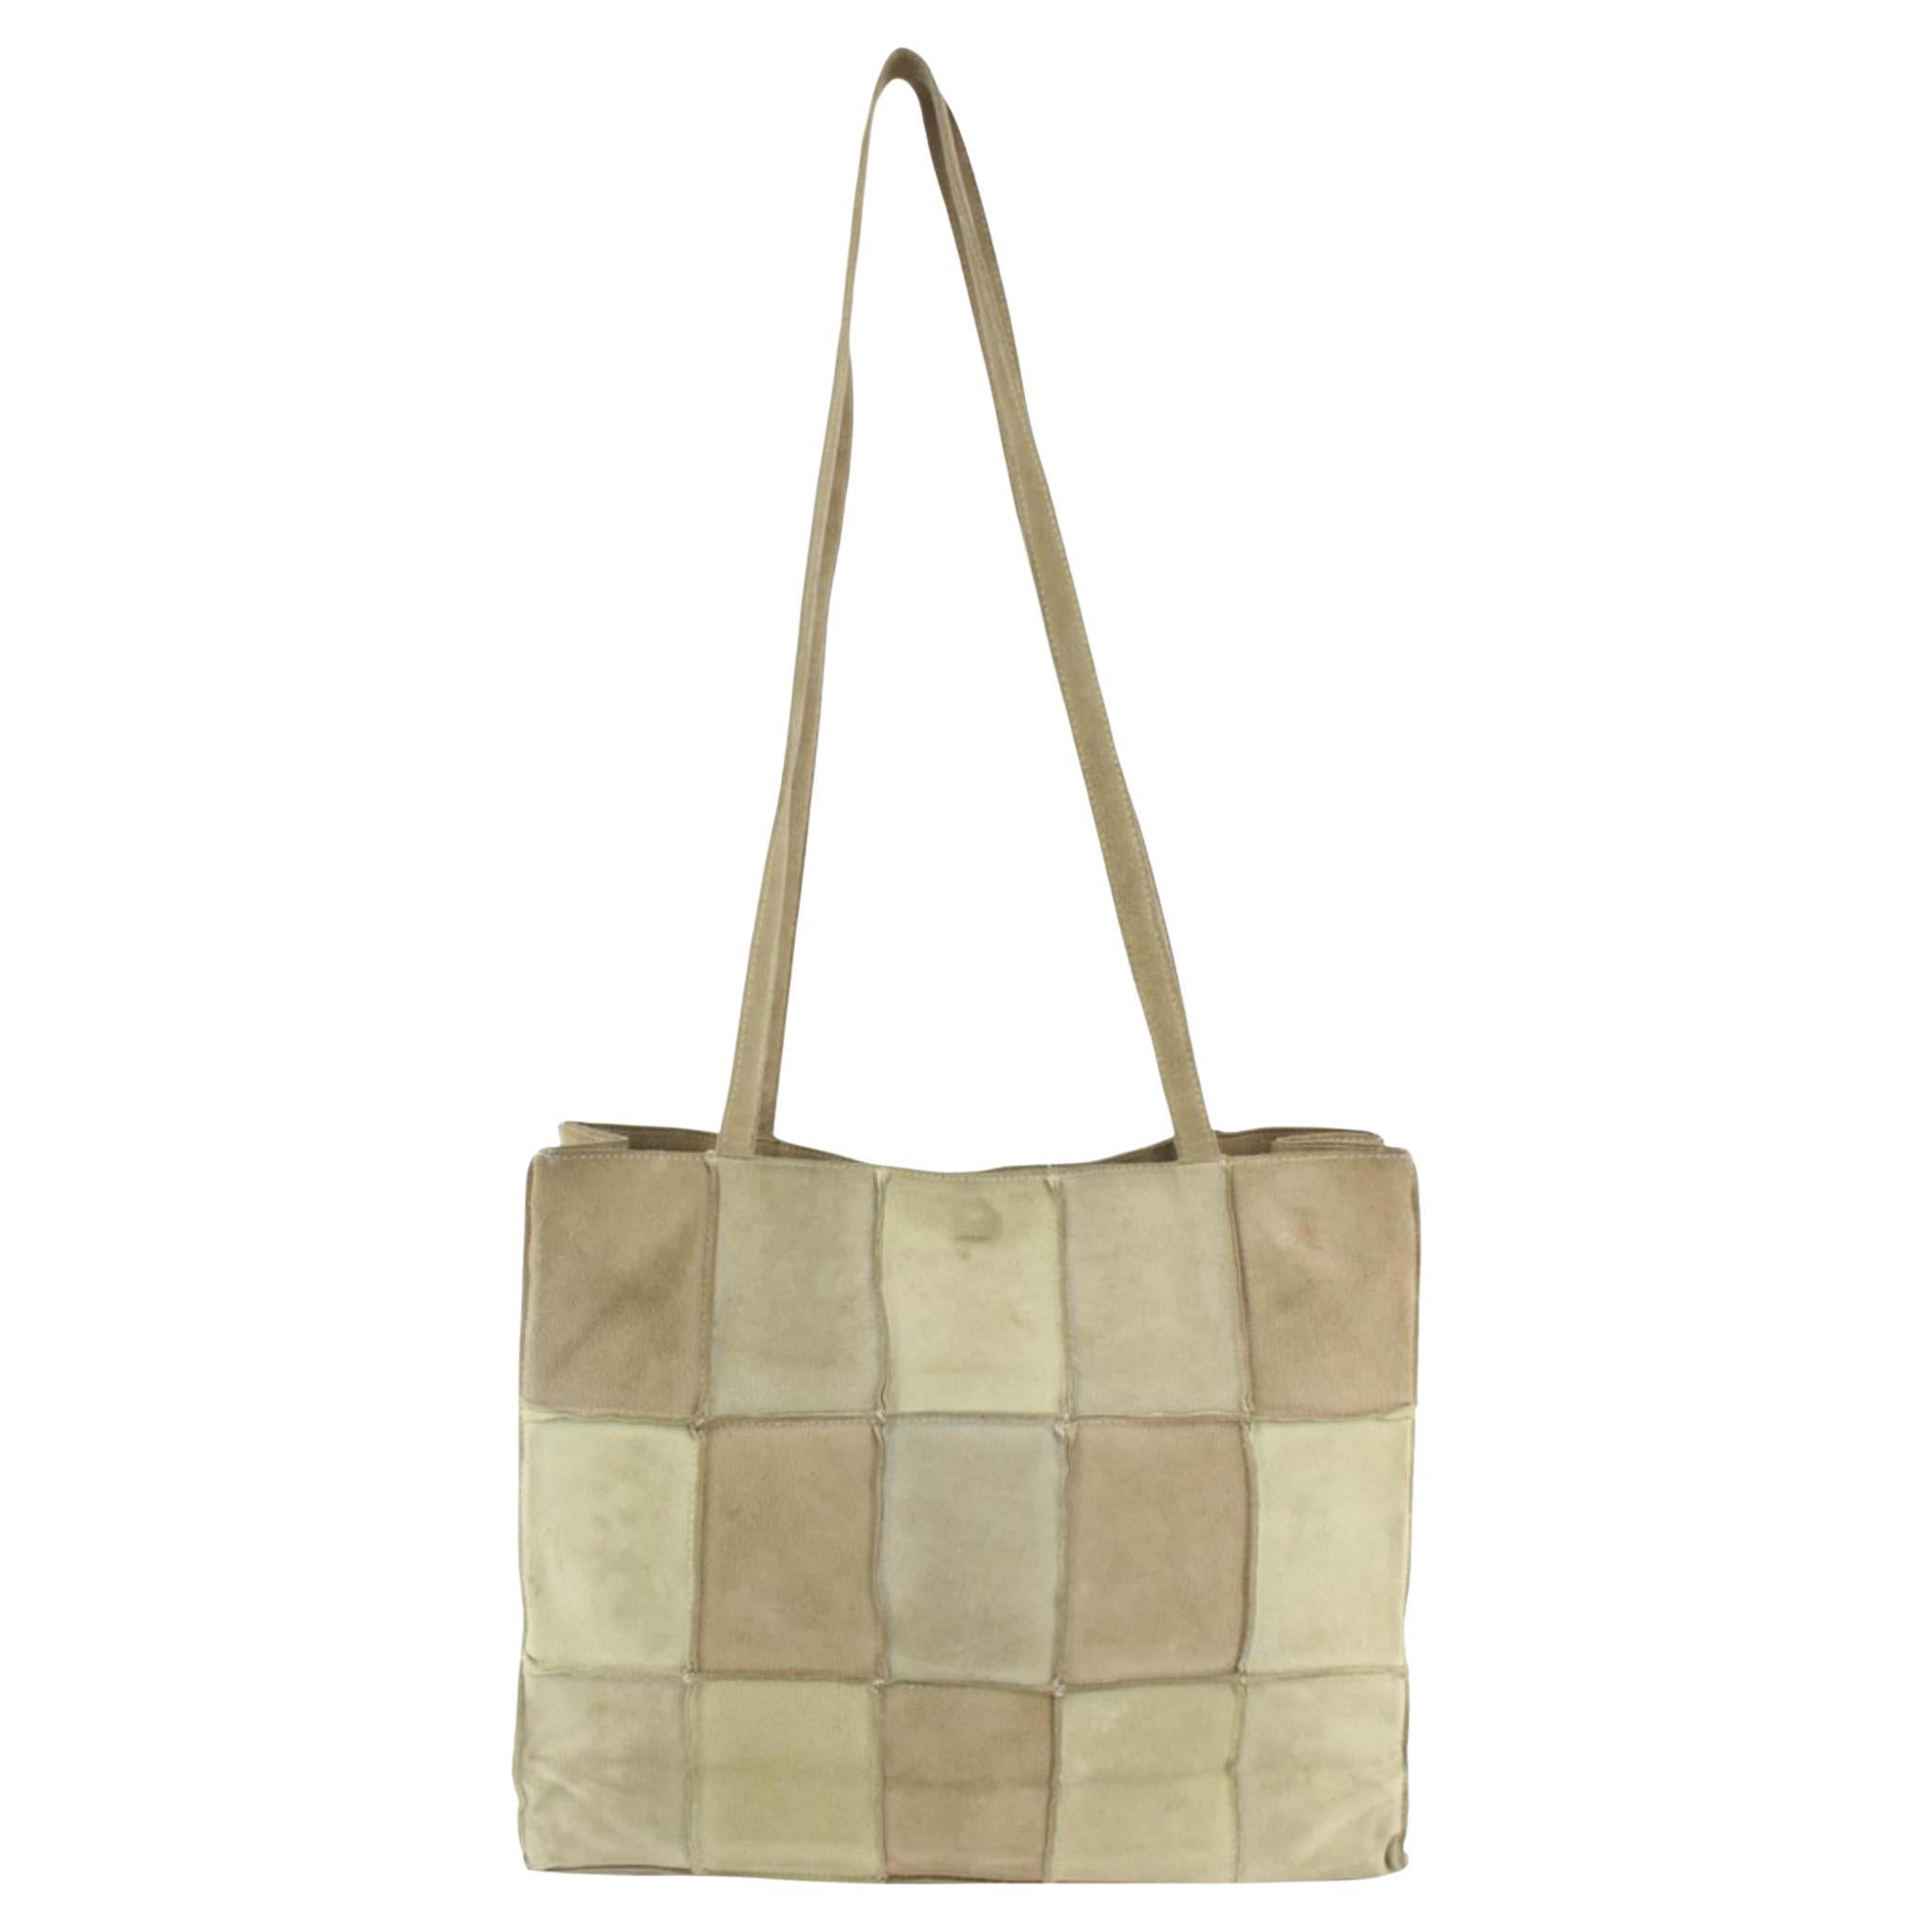 Chanel Beige Suede Patchwork Tote Bag 1130c11 For Sale